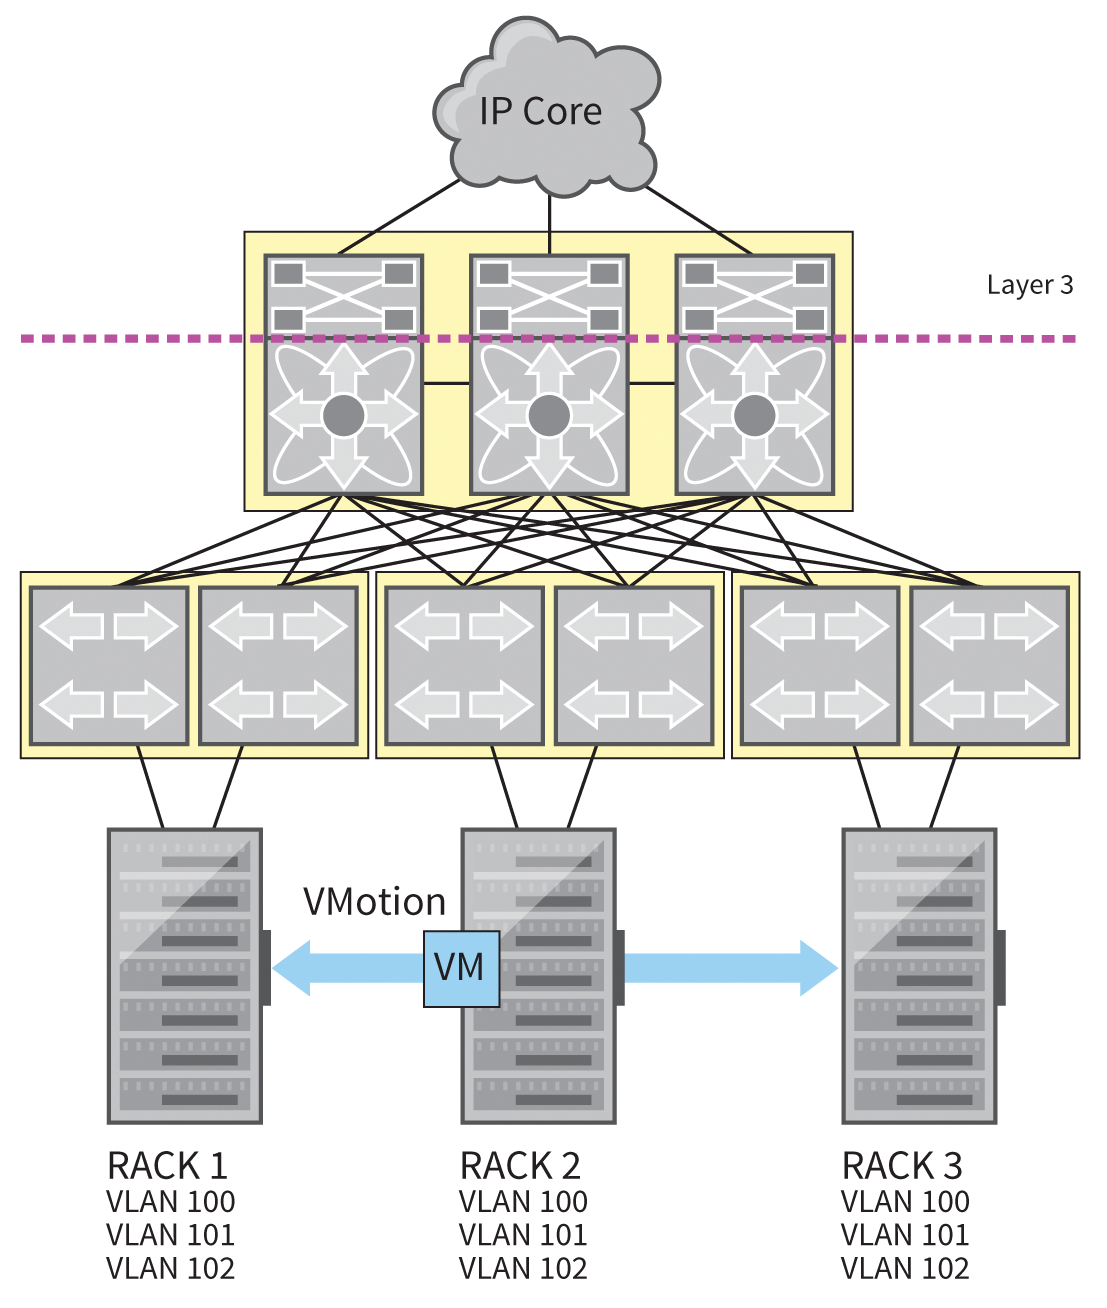 The Trill standard and Cisco's FabricPath protocol allow the aggregation of network connections. 